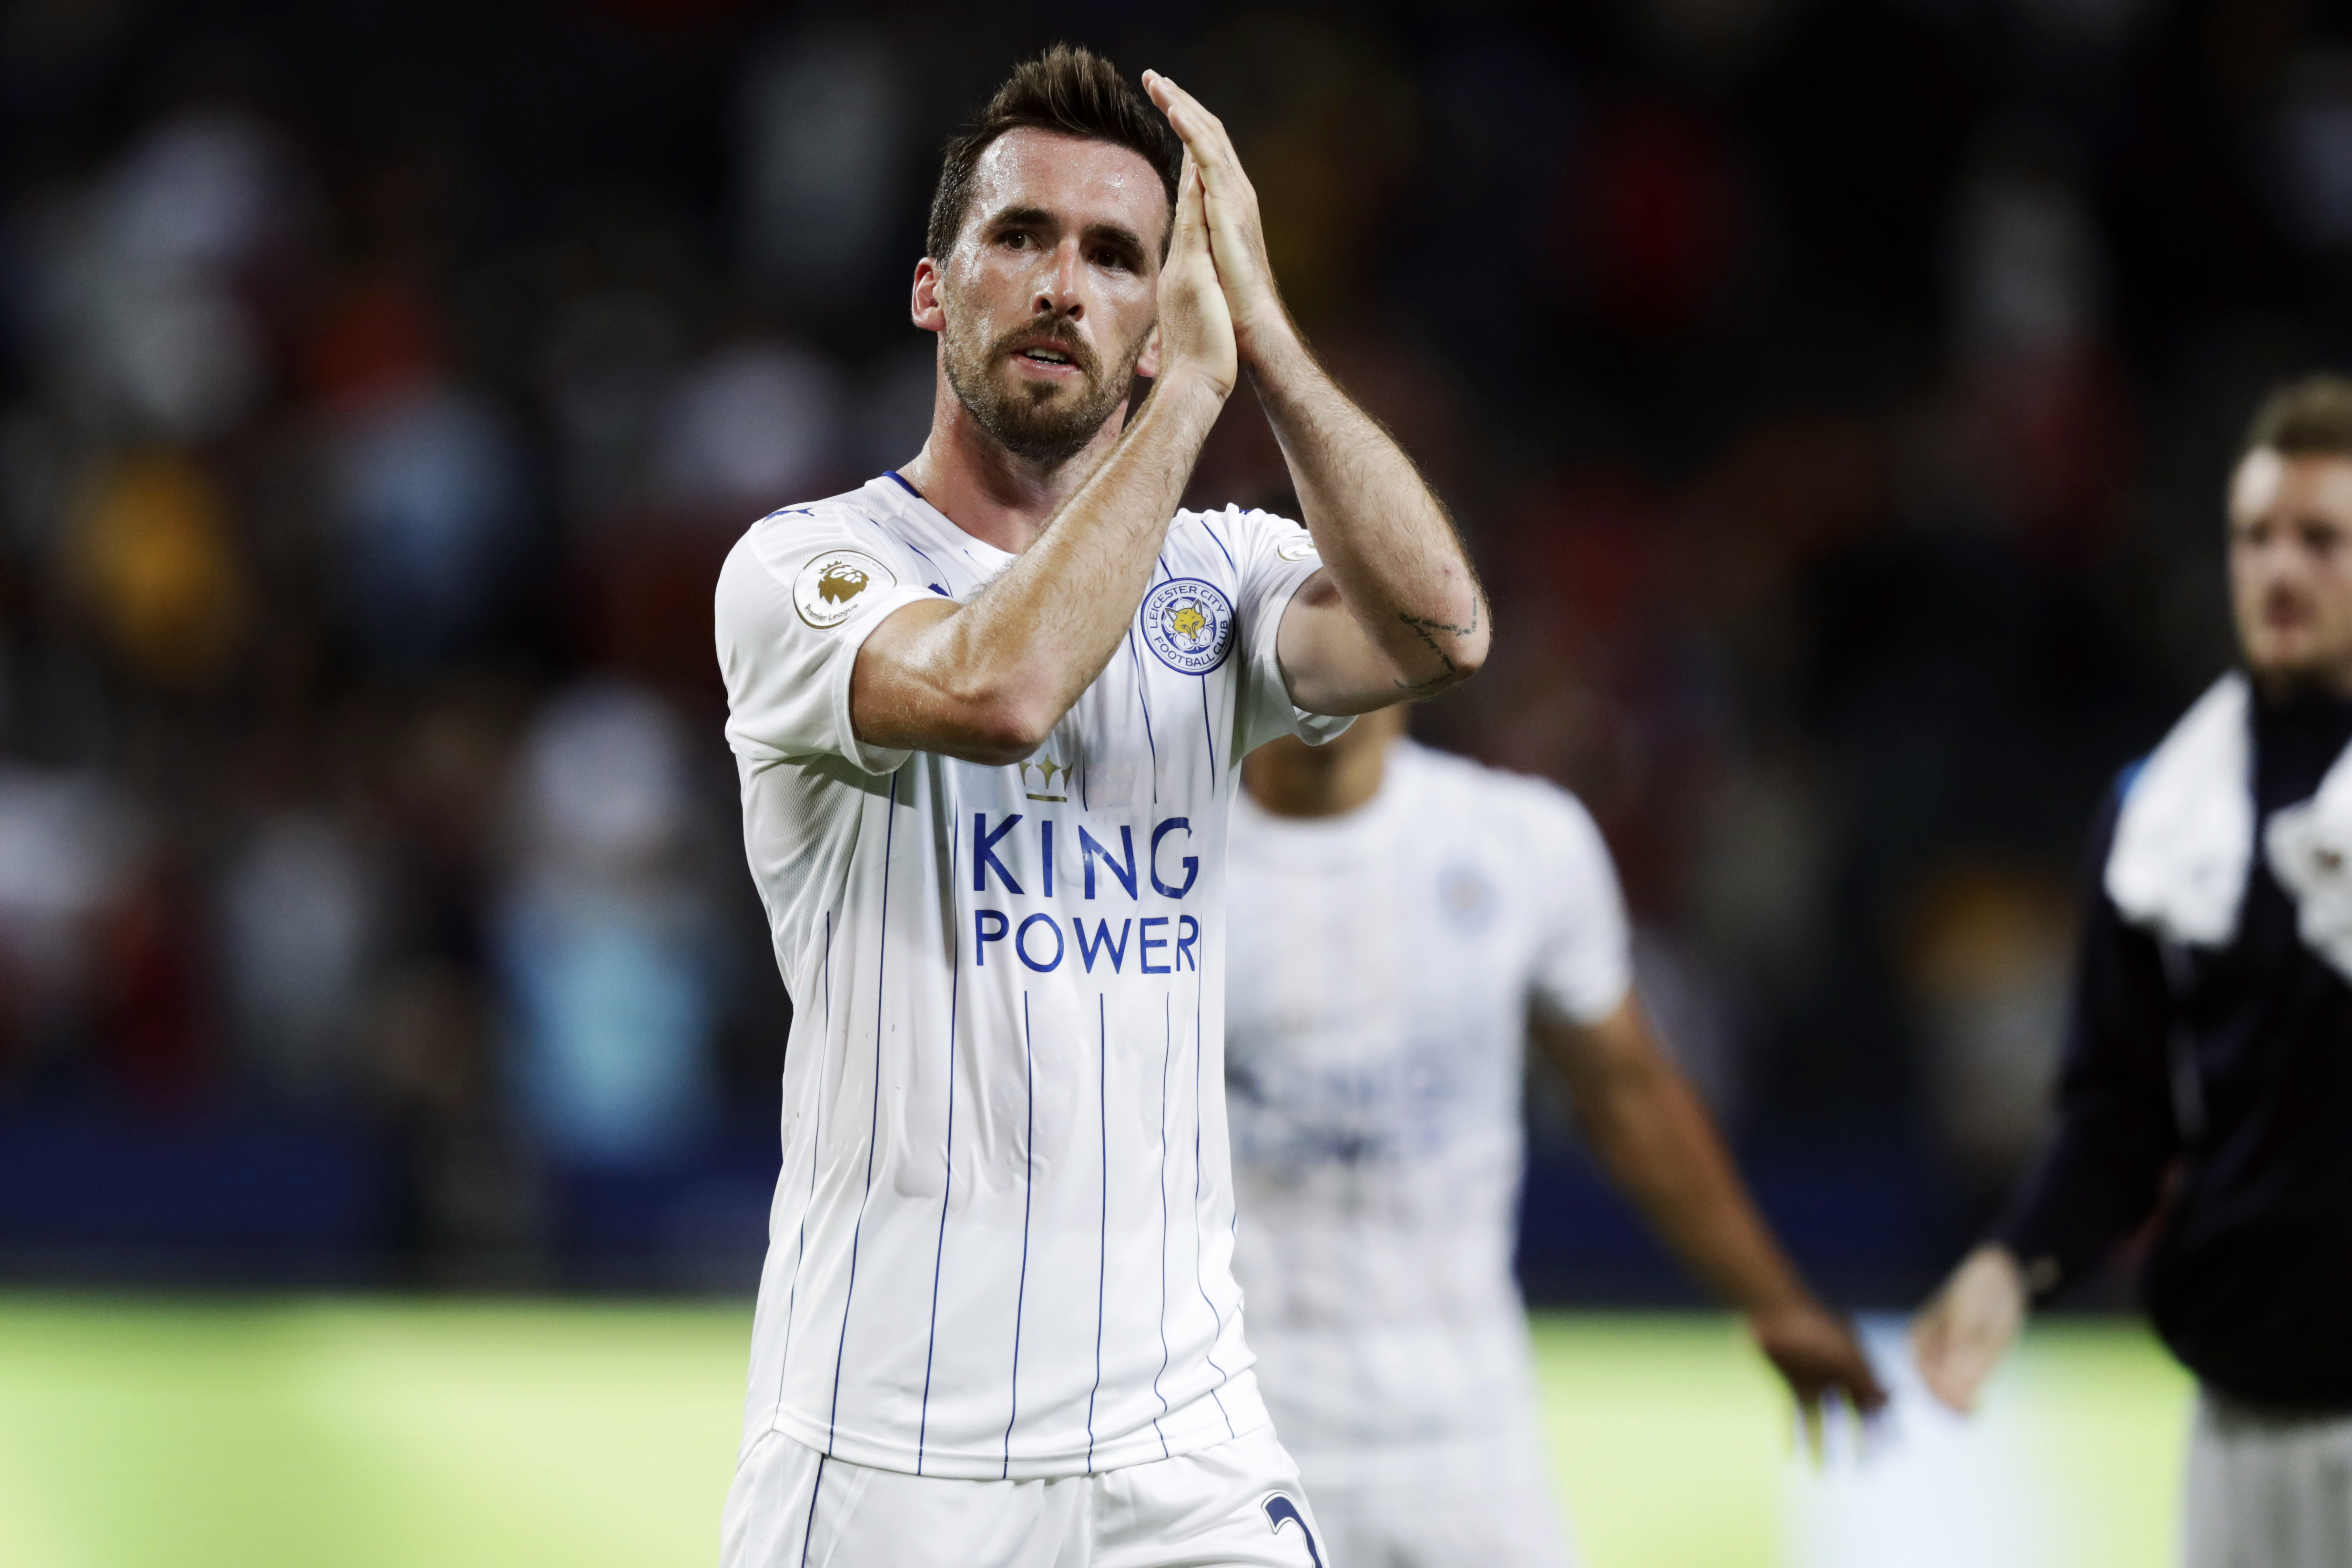 SOLNA, SWEDEN - AUGUST 03: Christian Fuchs of Leicester City FC during the International Champions Cup match between Leicester City FC and FC Barcelona at Friends arena on August 3, 2016 in Solna, Sweden. (Photo by Nils Petter Nilsson/Ombrello/Getty Images)